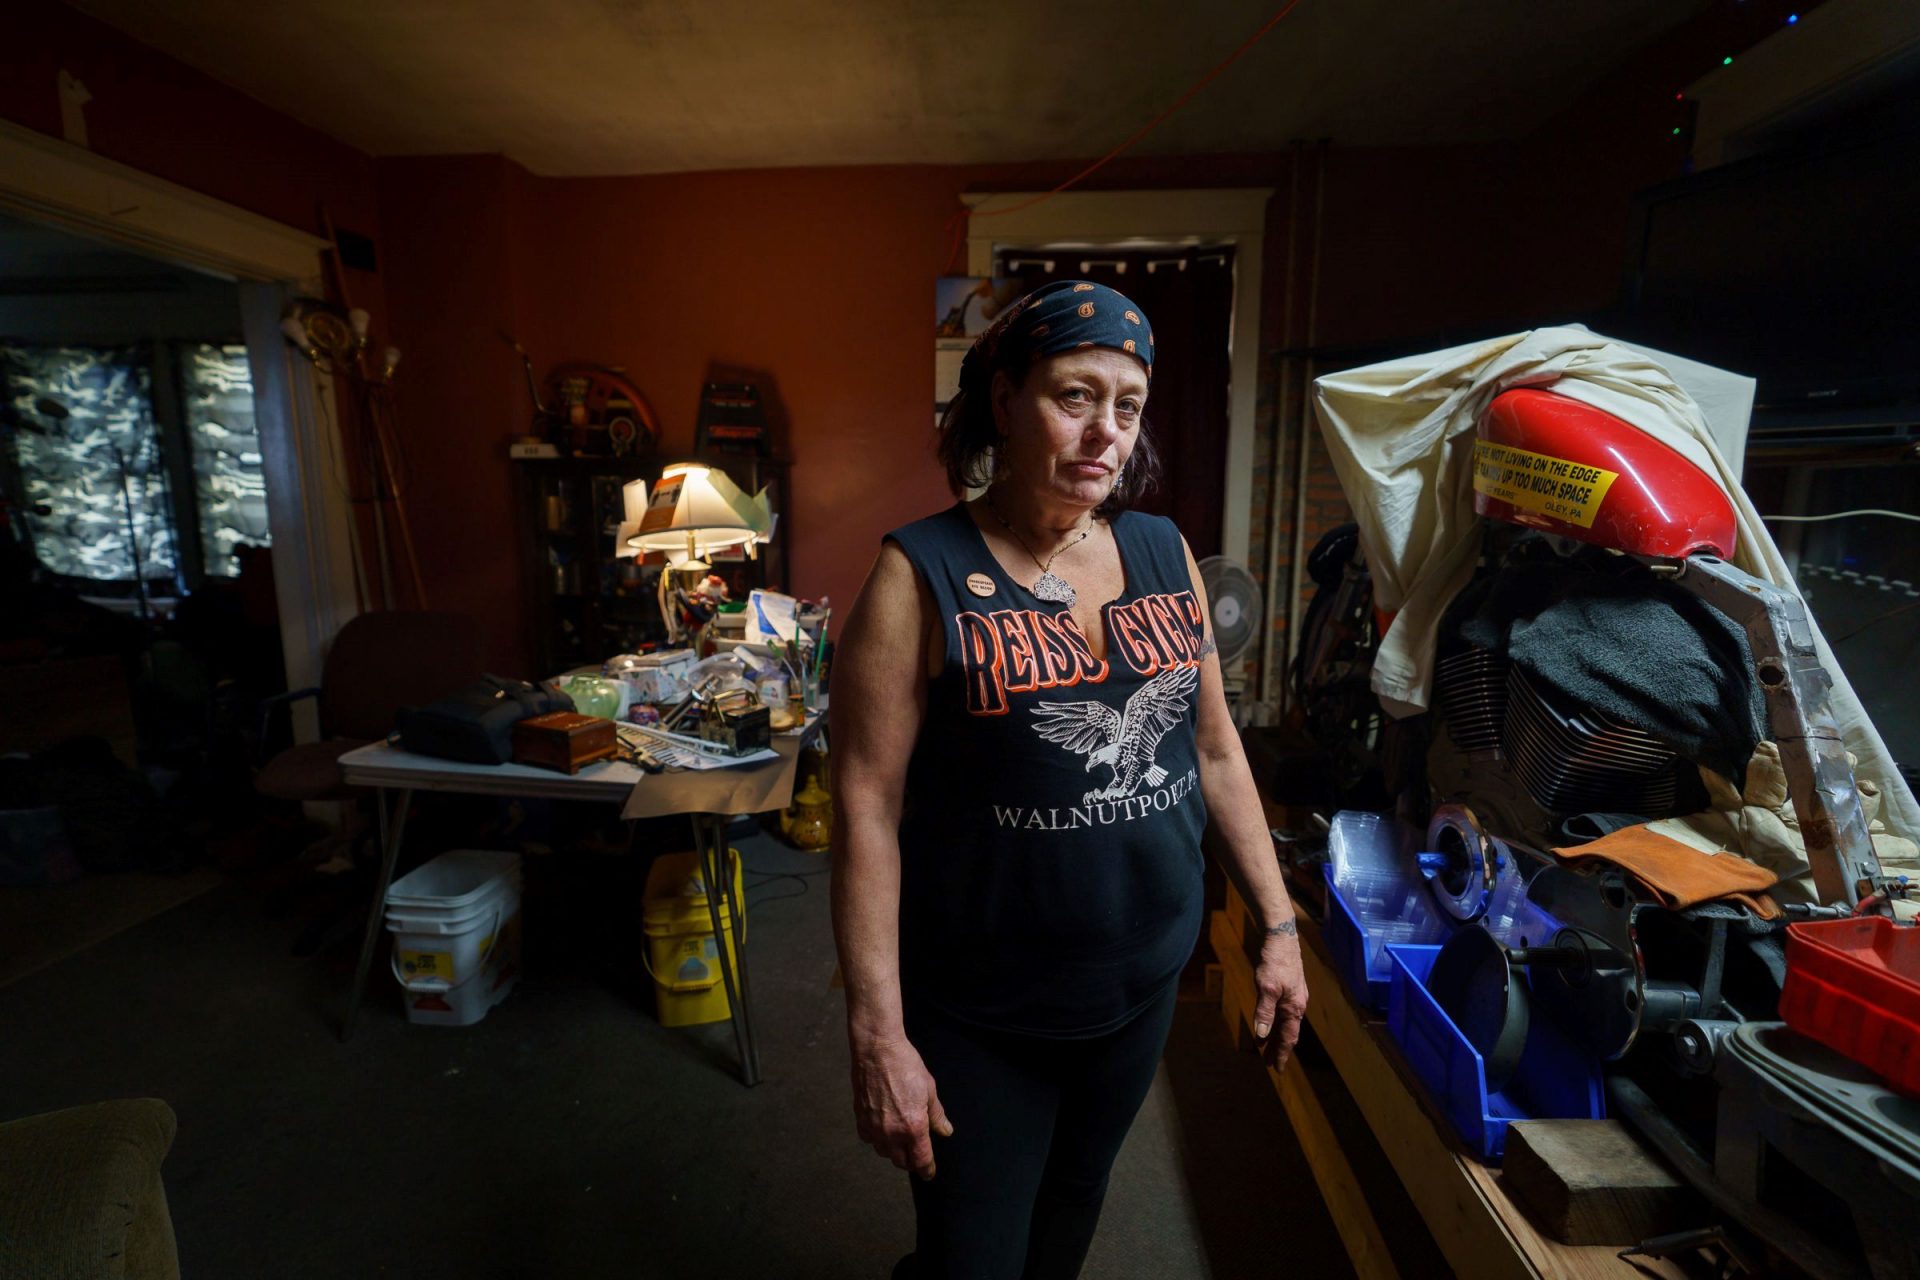 Hundreds of thousands of Pennsylvanians, including Sandra Huffman of East Greenville, Pa., have been struggling to make ends meet in January because of a month-long gap in coronavirus unemployment benefits.